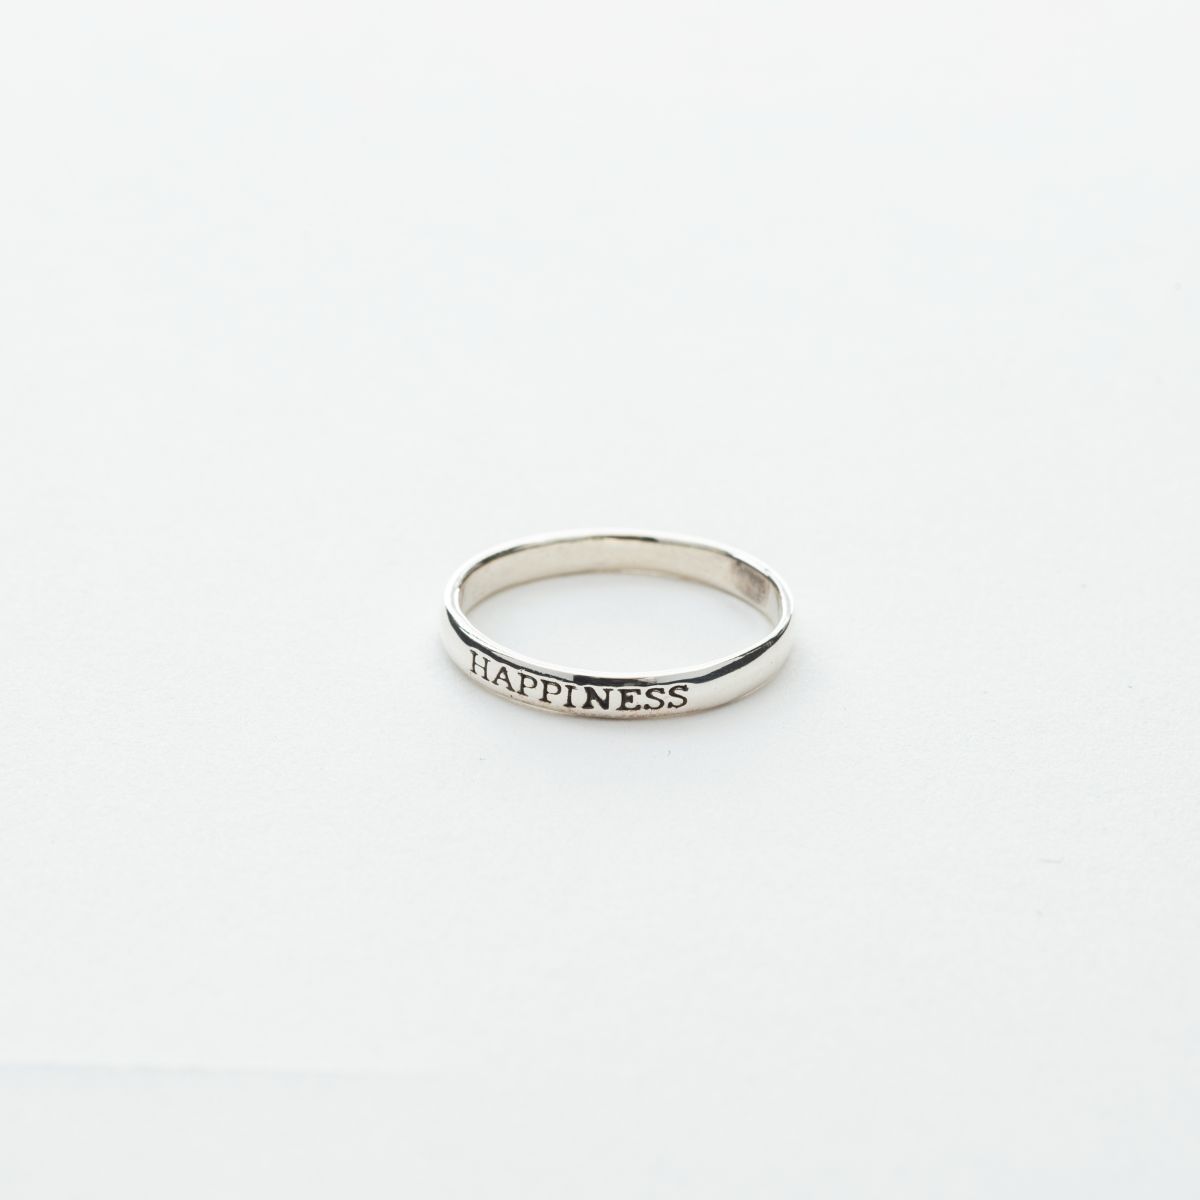 "Happiness" Script Skinny Band Ring in Silver